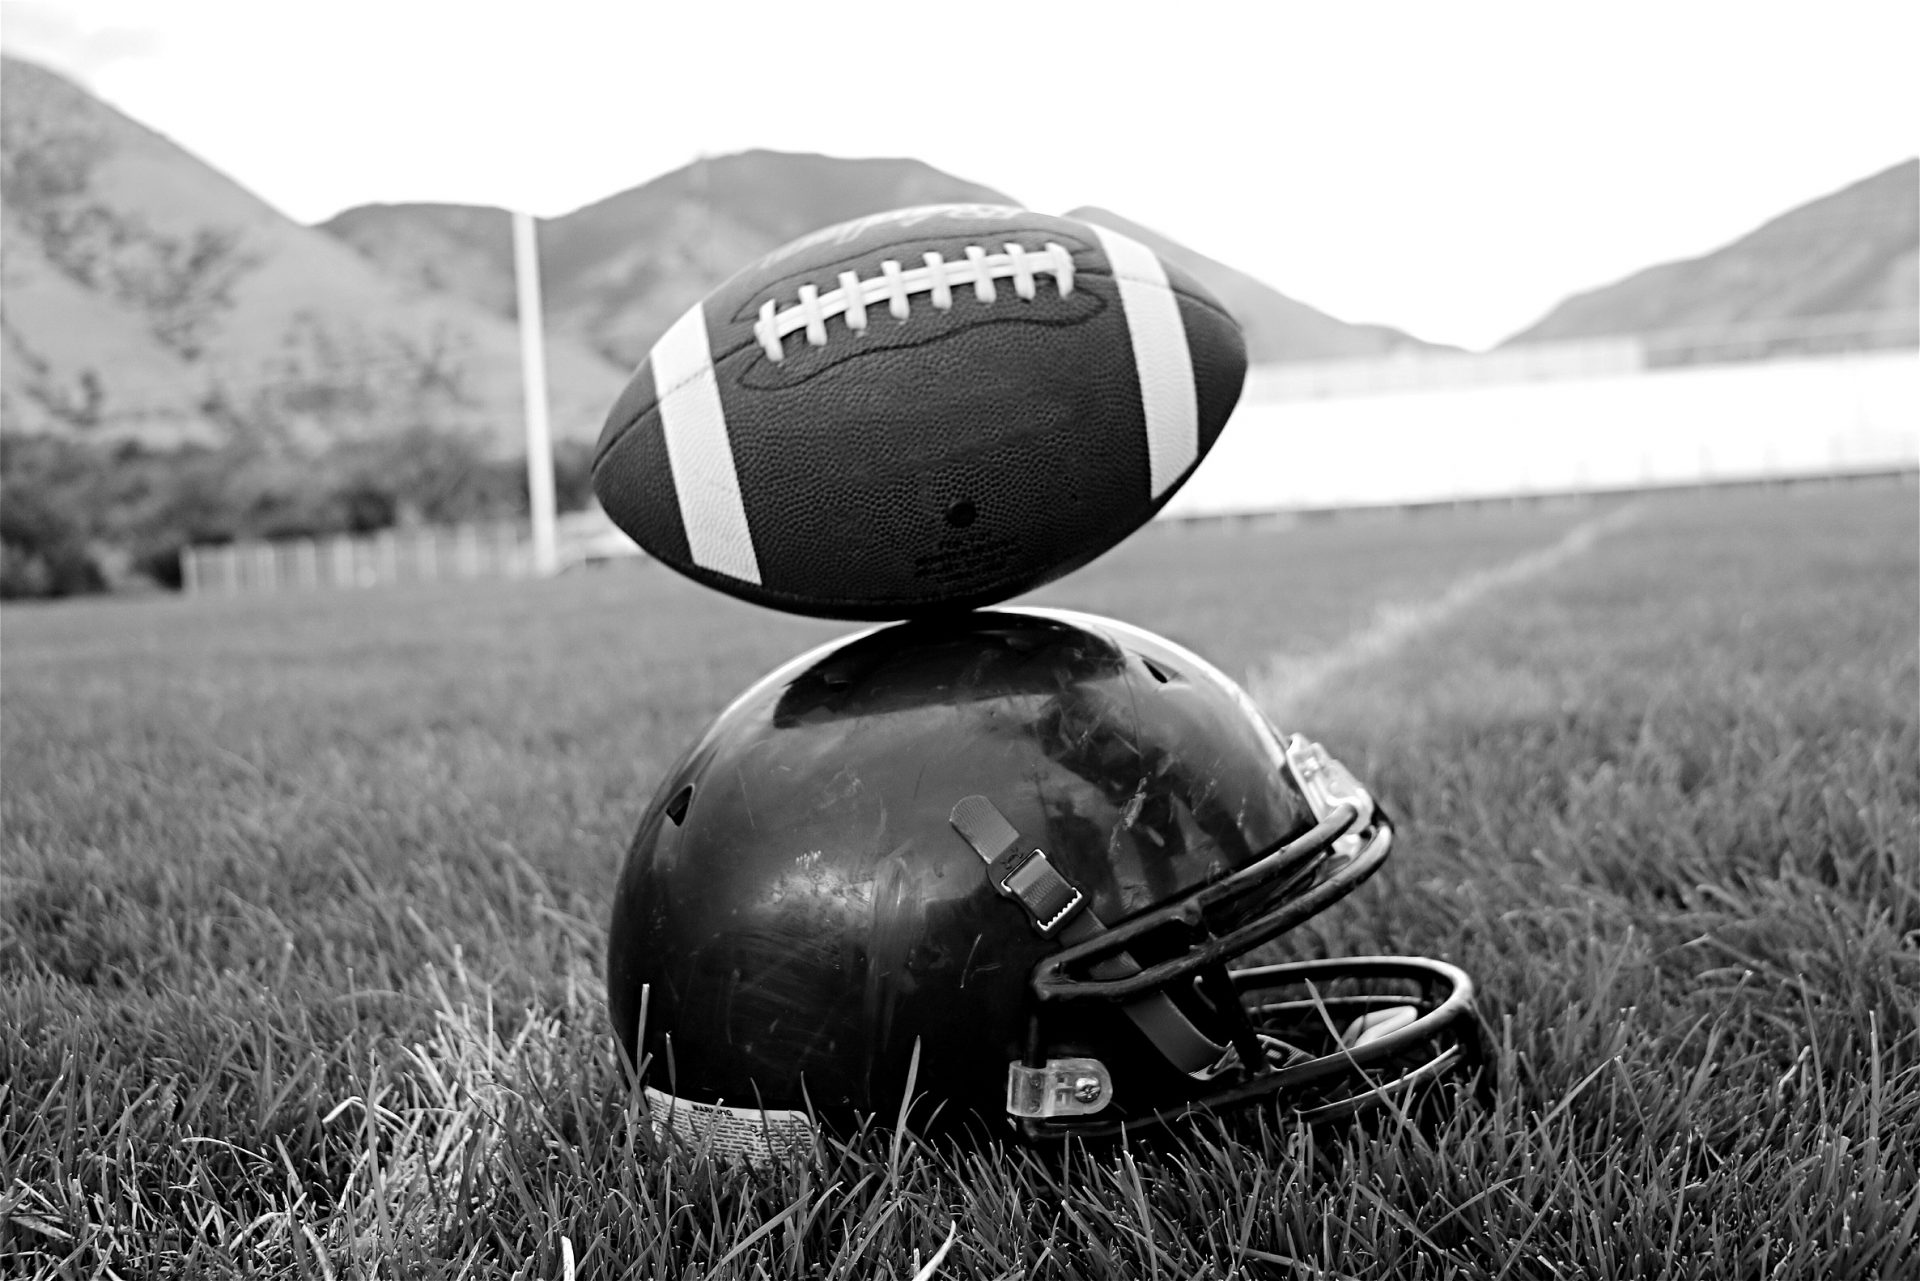 The best football equipment for safety and performance